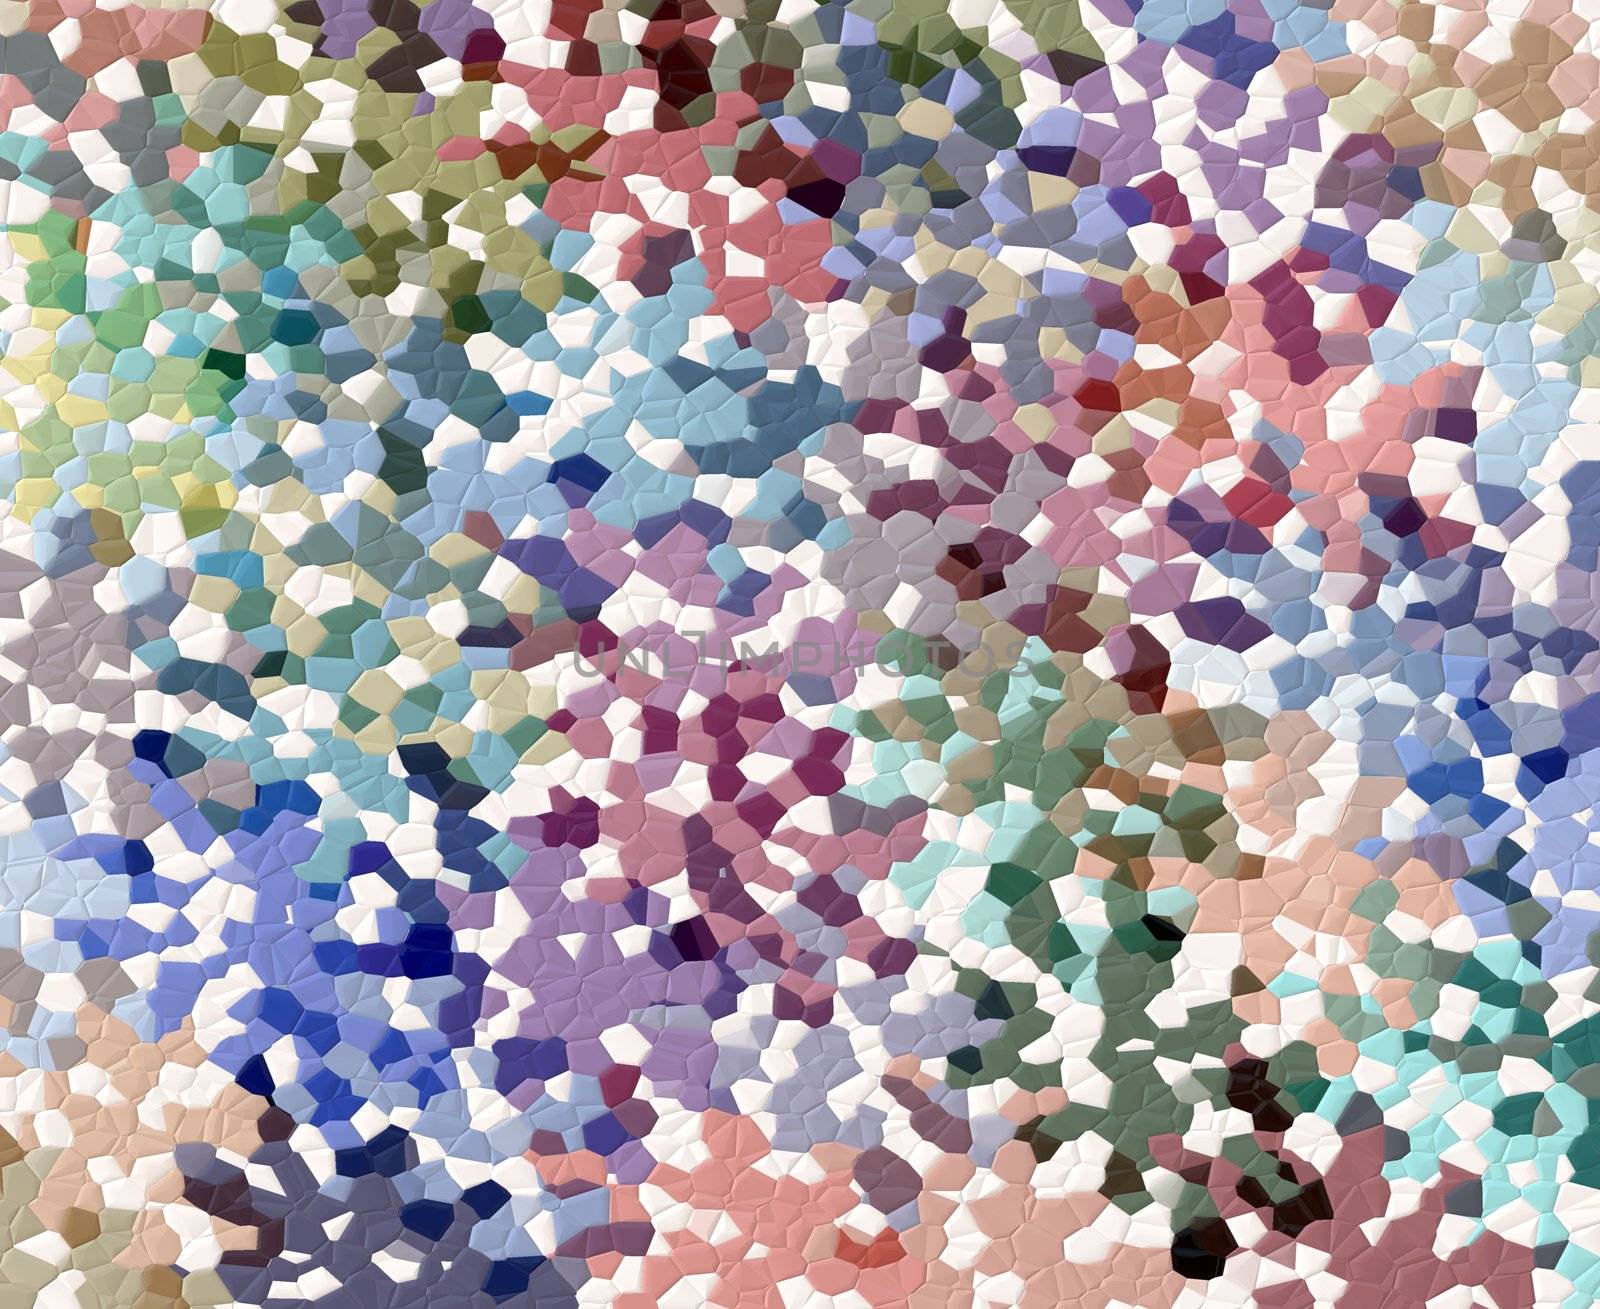 abstract texture of colorful and white mosaic tiles